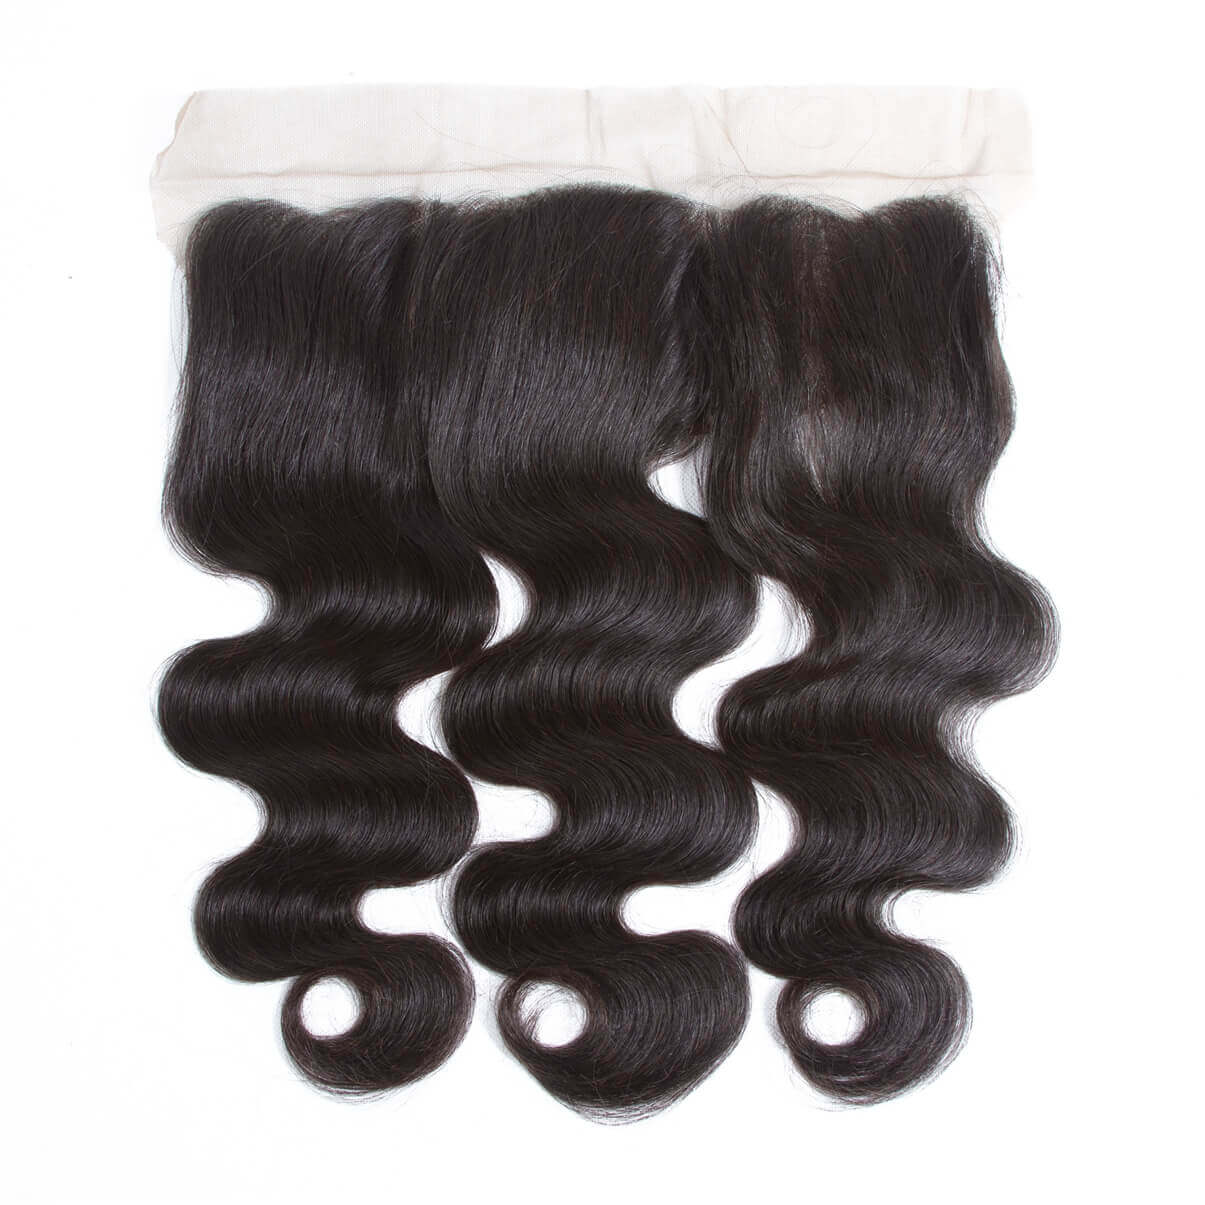 Lakihair Virgin Human Hair Brazilian Body Wave 4 Bundles With Lace Frontal Closure 13x4 Pre Plucked Ear To Ear Frontal